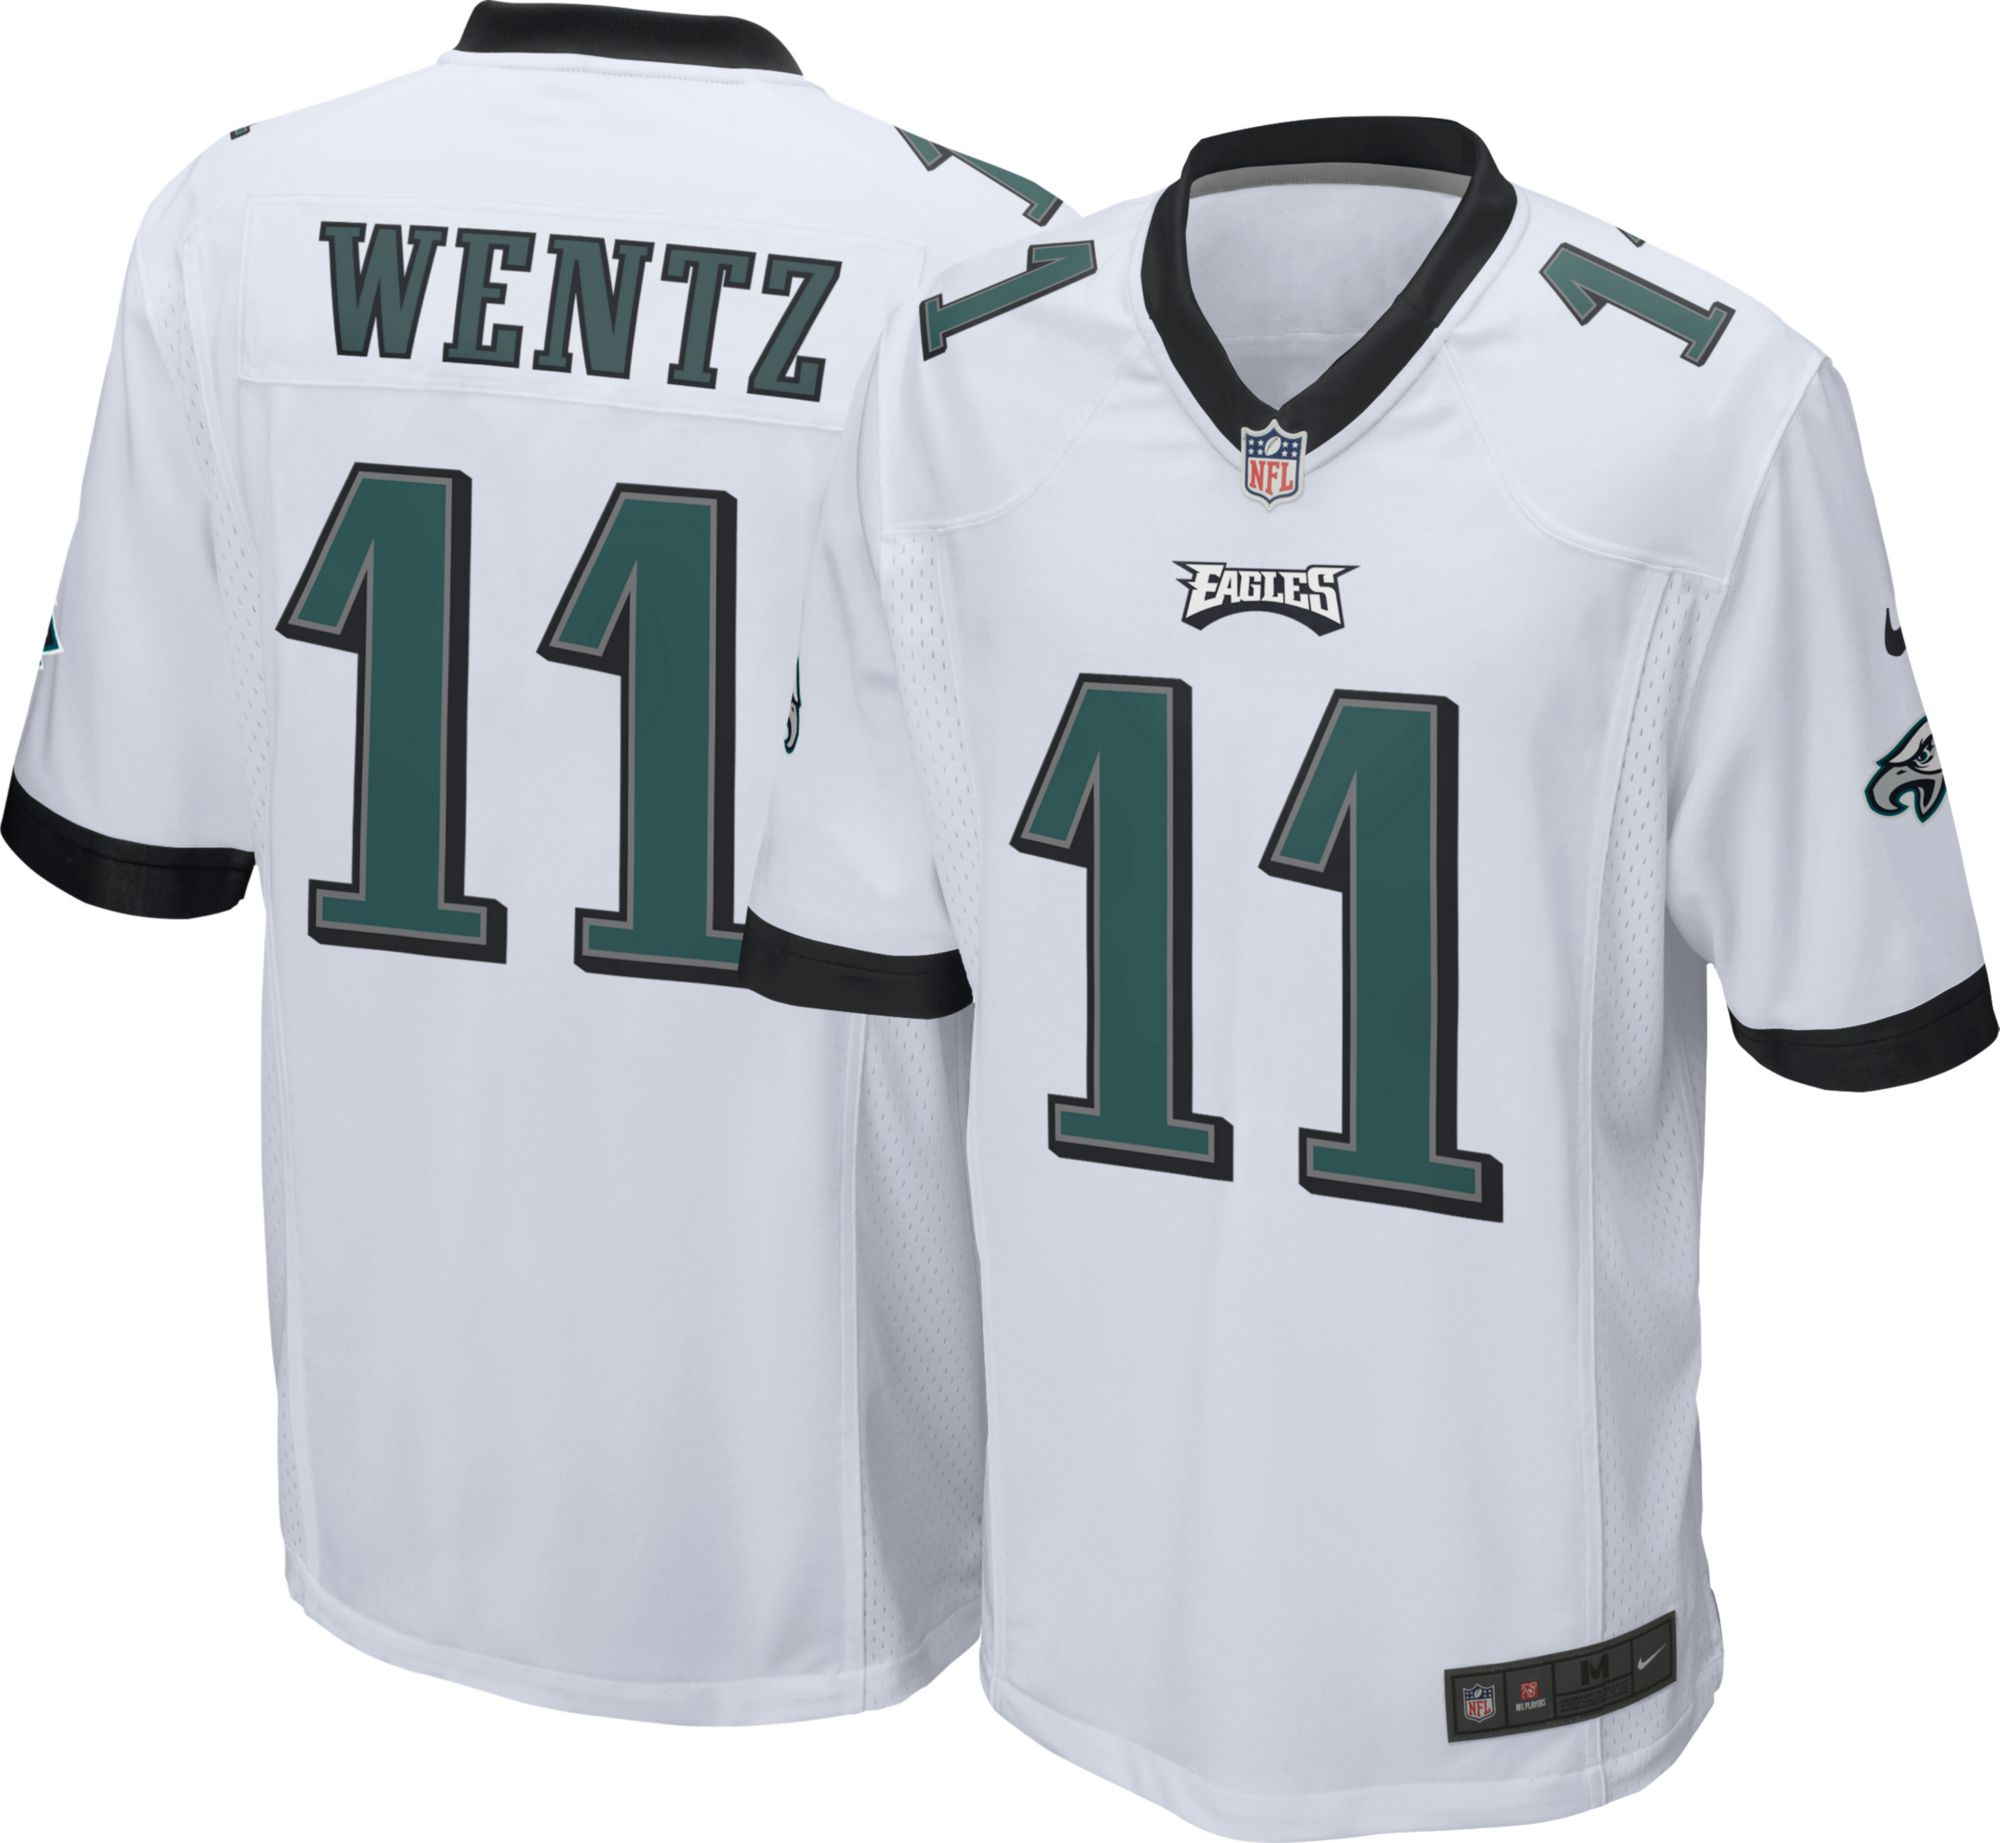 eagles away jersey